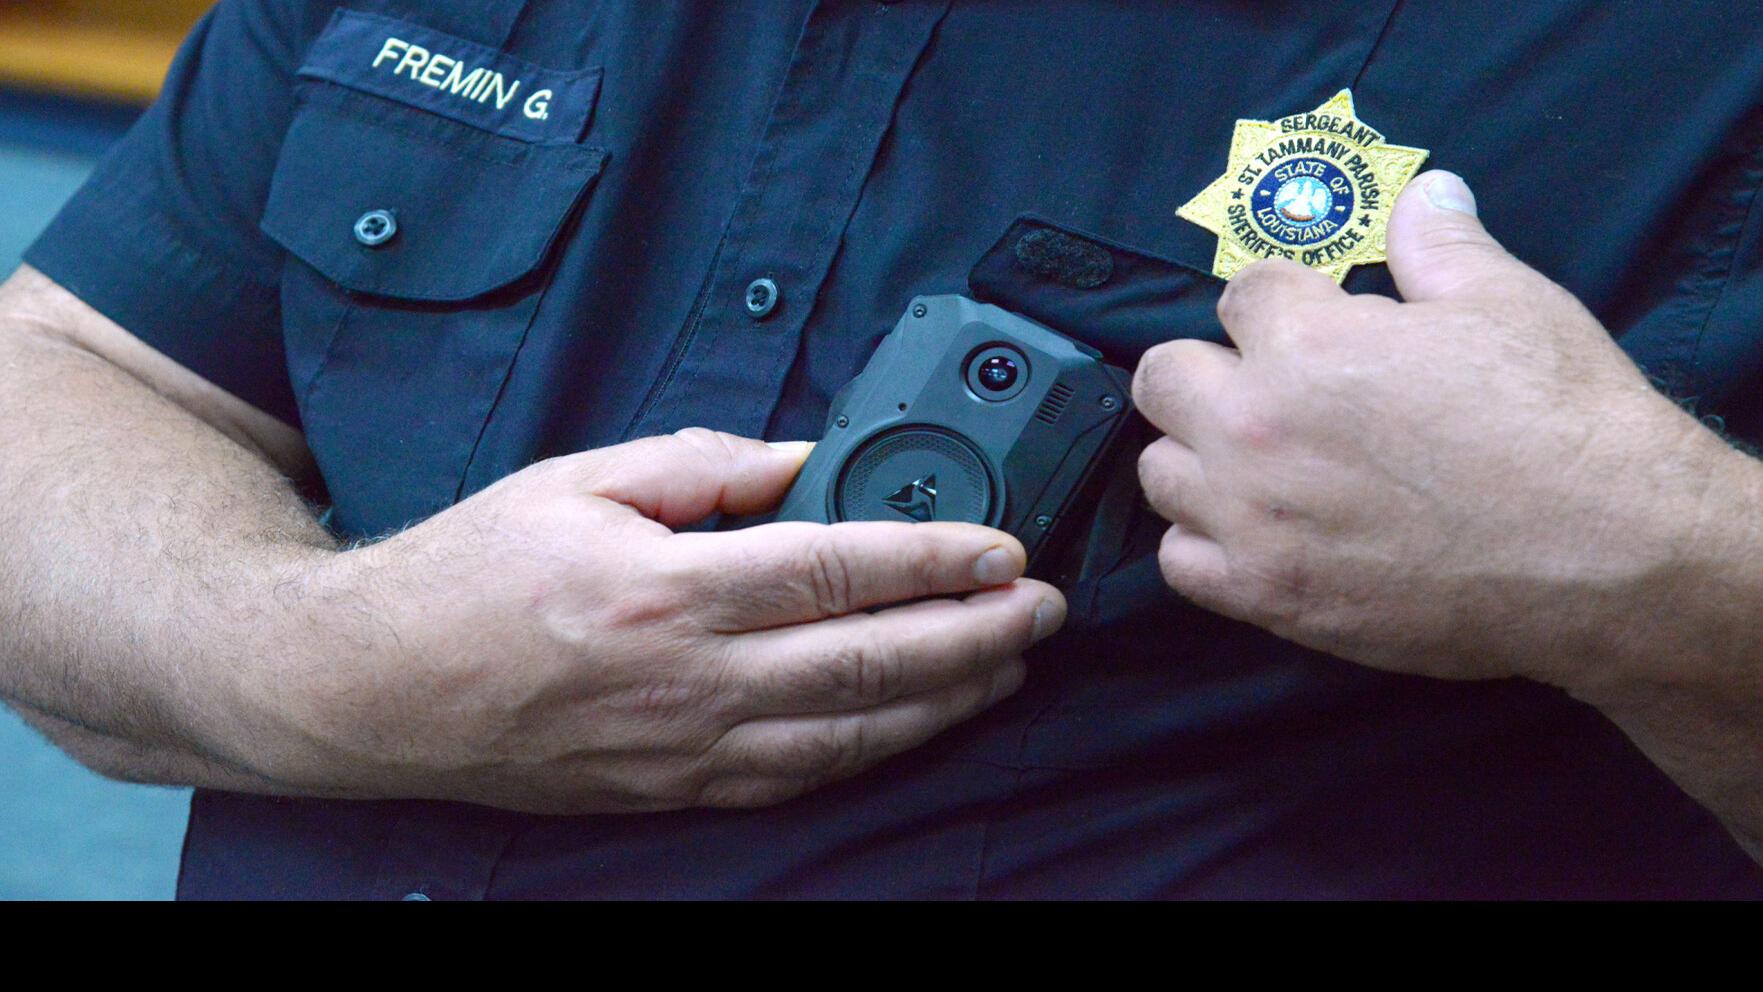 Plaquemine police officers now equipped with body cameras